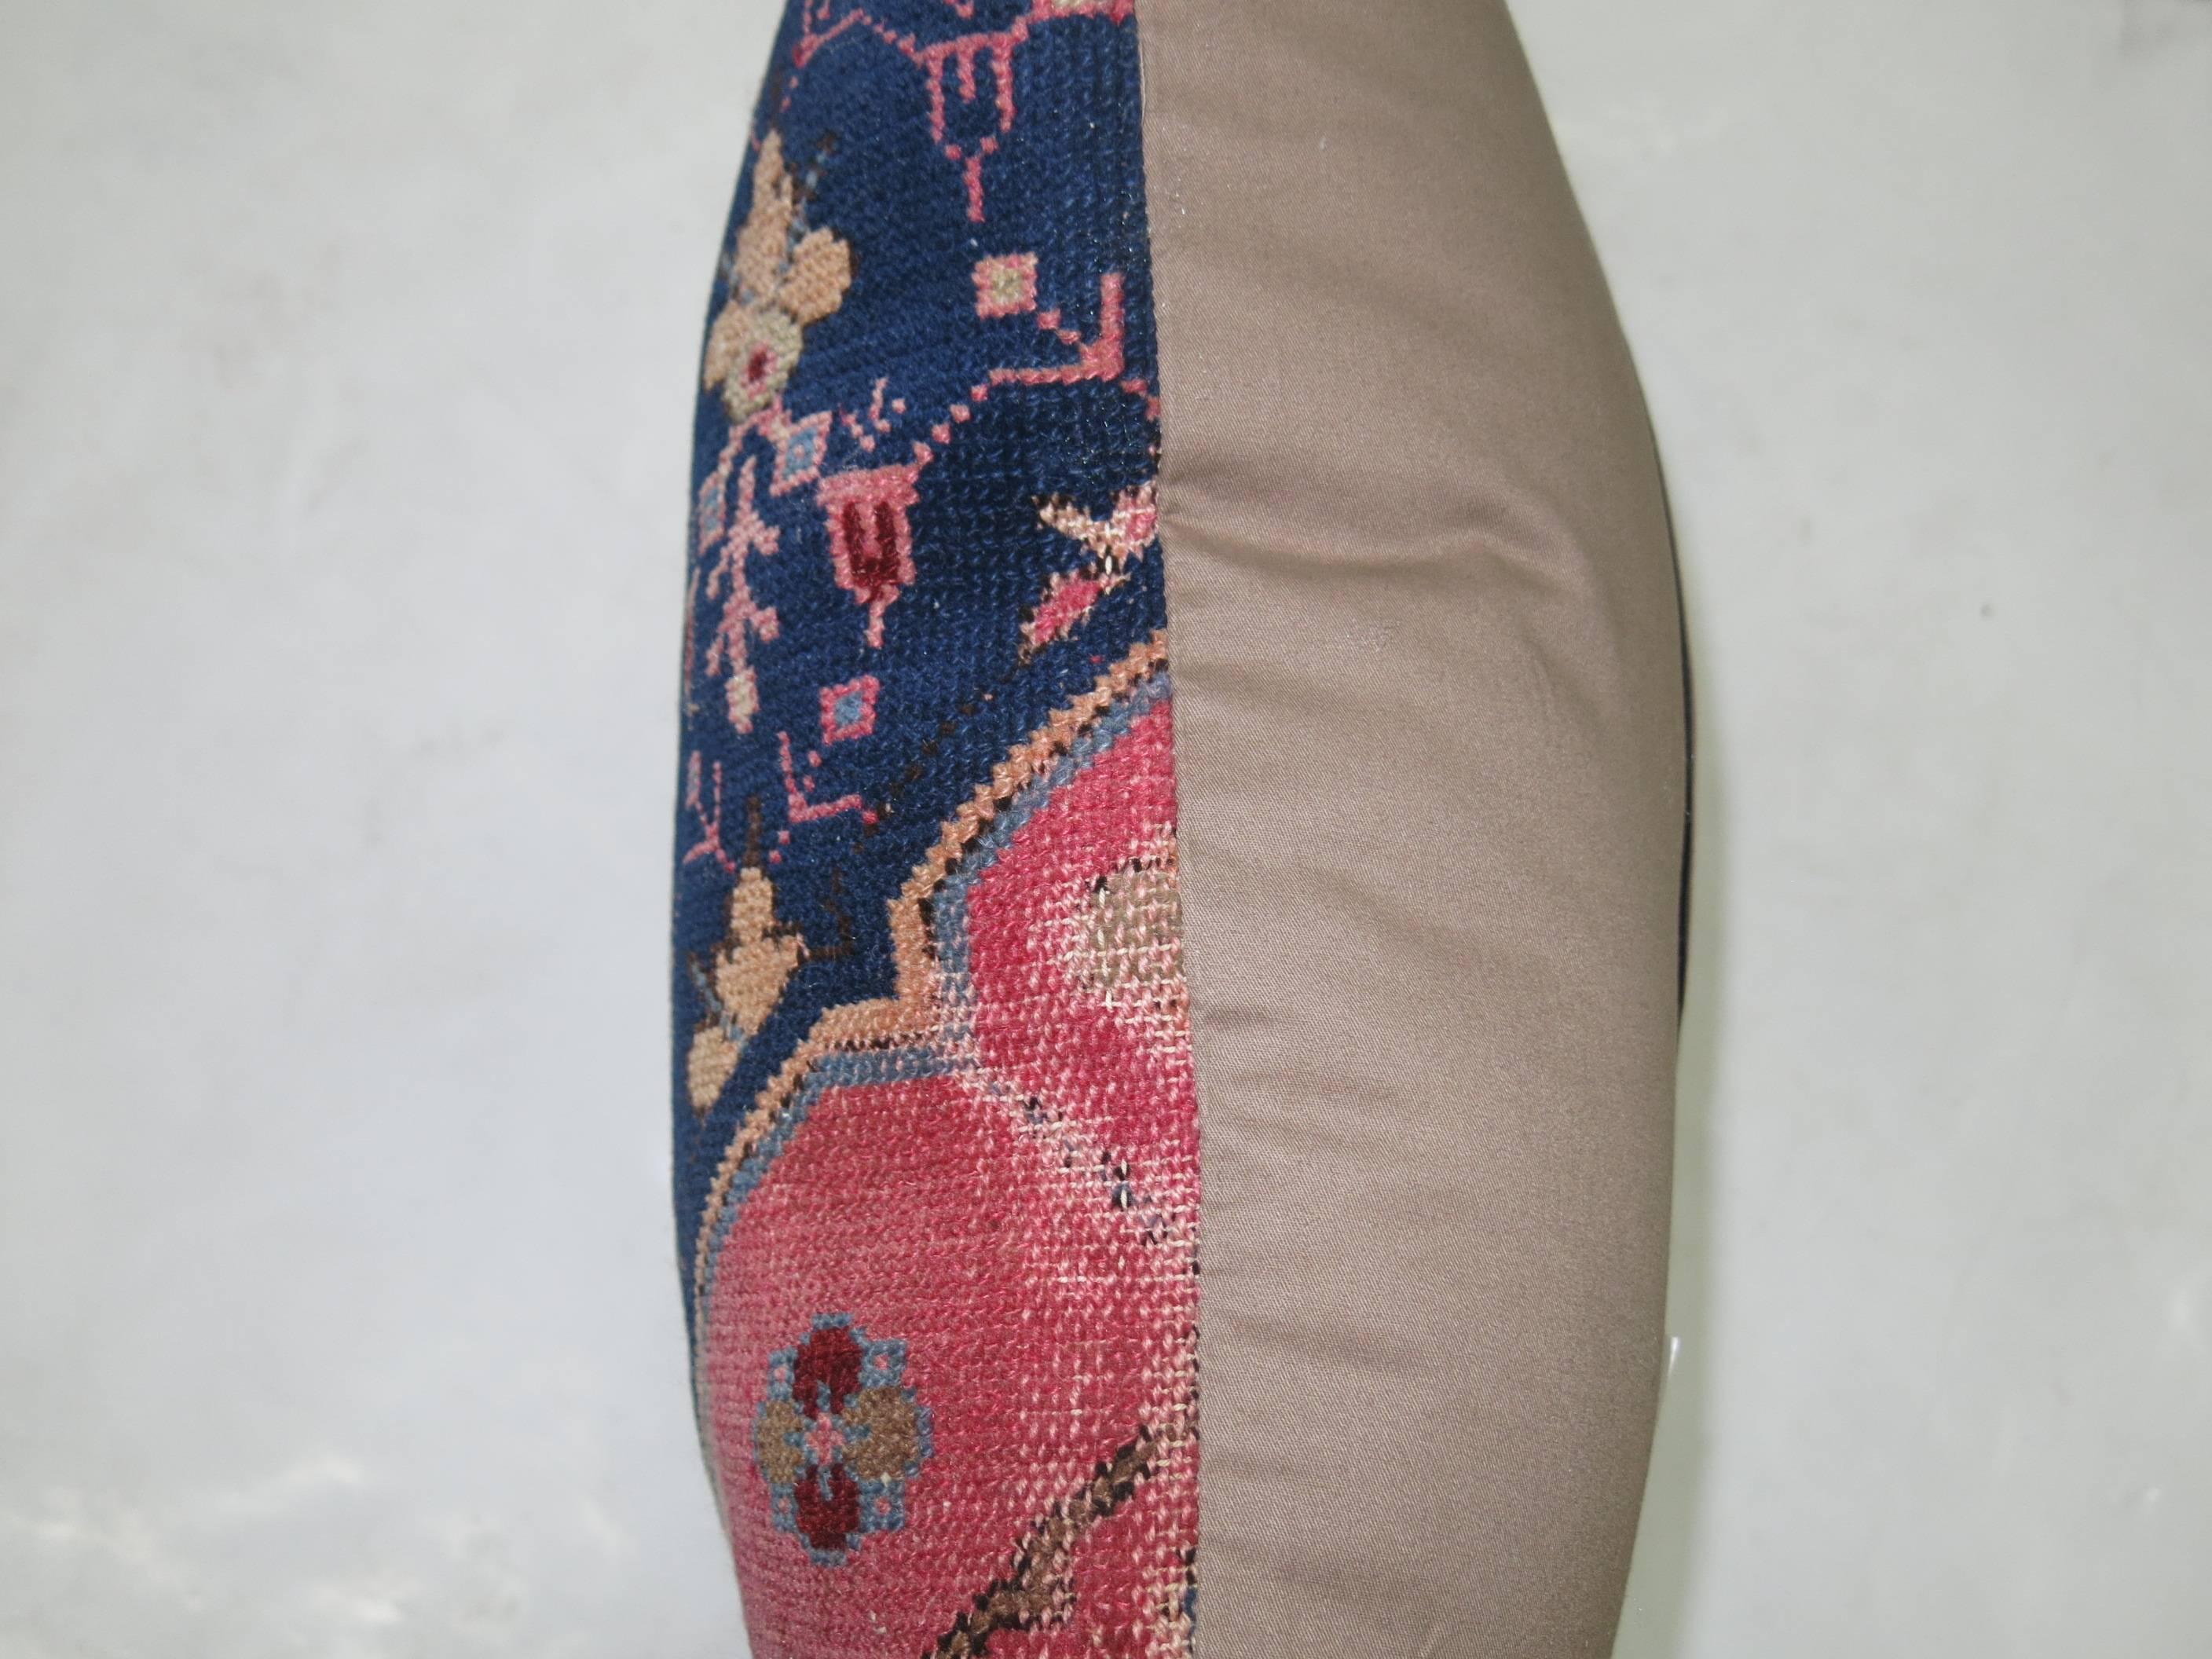 Antique Persian rug pillow in navy and pink.